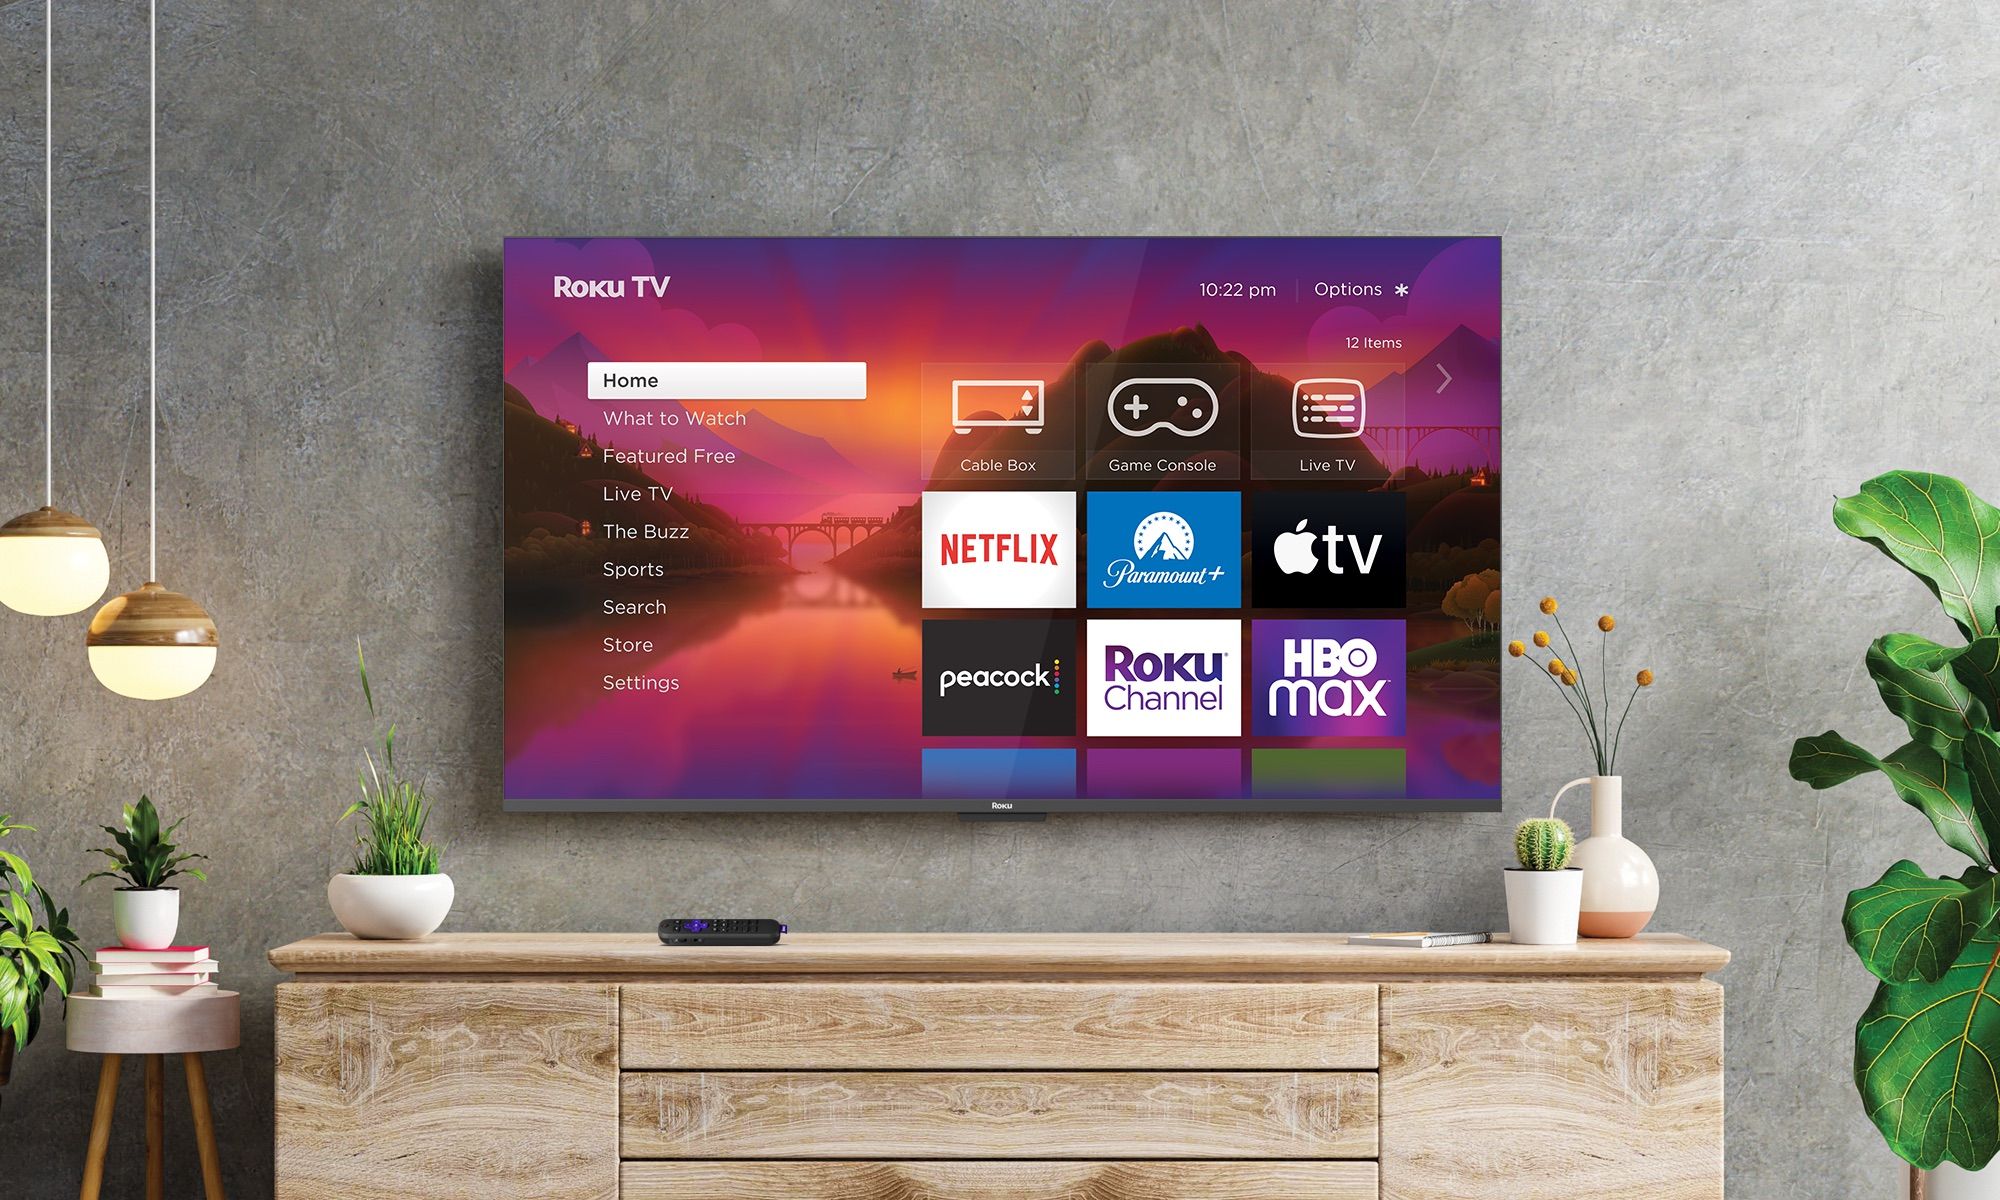 How to watch your local TV channels on a Roku streamer